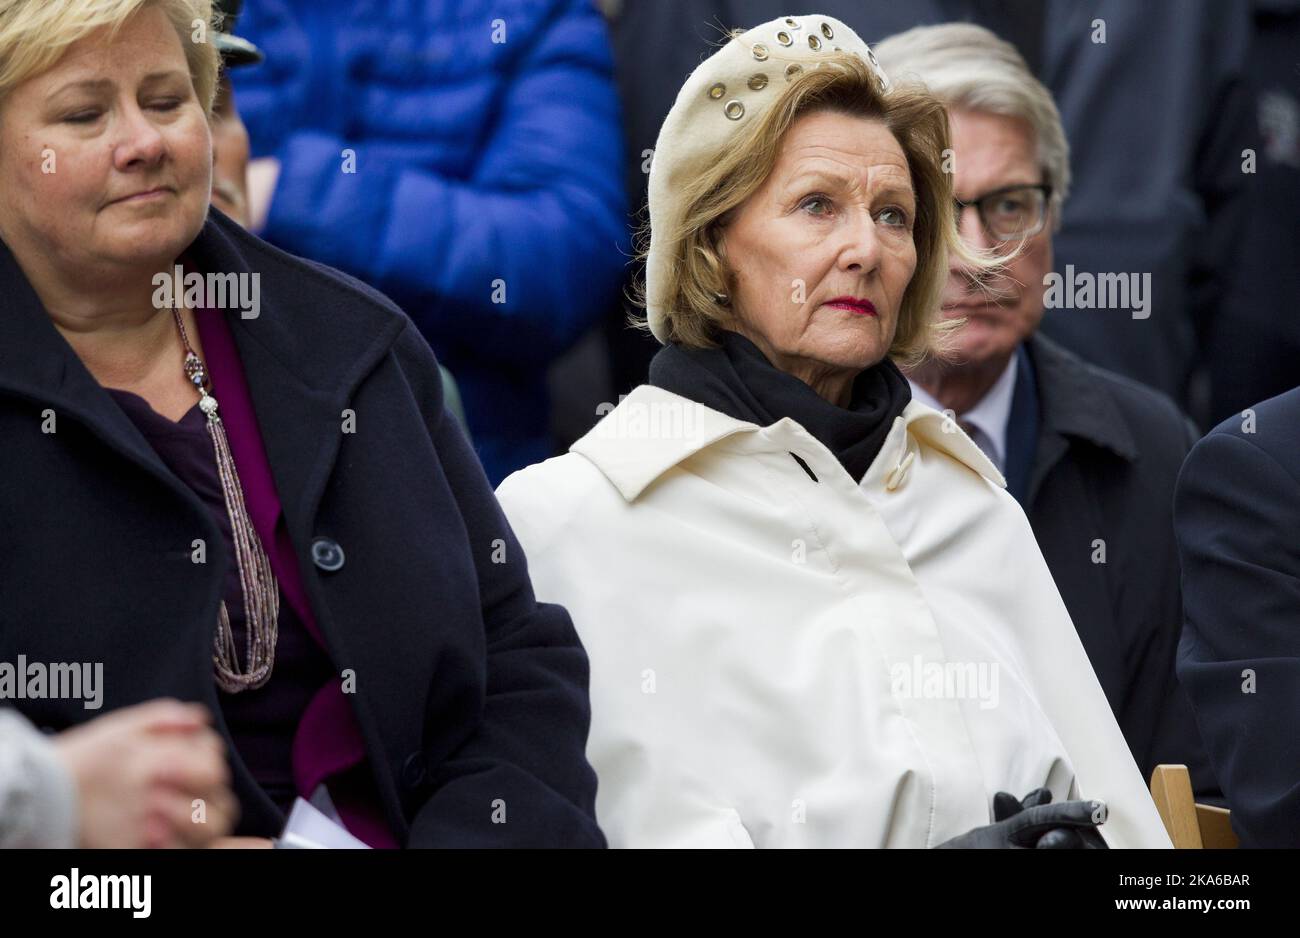 Oslo 20150407. HM Queen Sonja during a memorial ceremony at Akershus quay in Oslo on Tuesday afternoon, in connection with the 25th anniversary of the fire on the ferry 'Scandinavian Star'. Prime Minister Erna Solberg left, and Oslo Mayor Fabian Stang right. Photo: Vegard Wivestad Groett / NTB scanpix Stock Photo